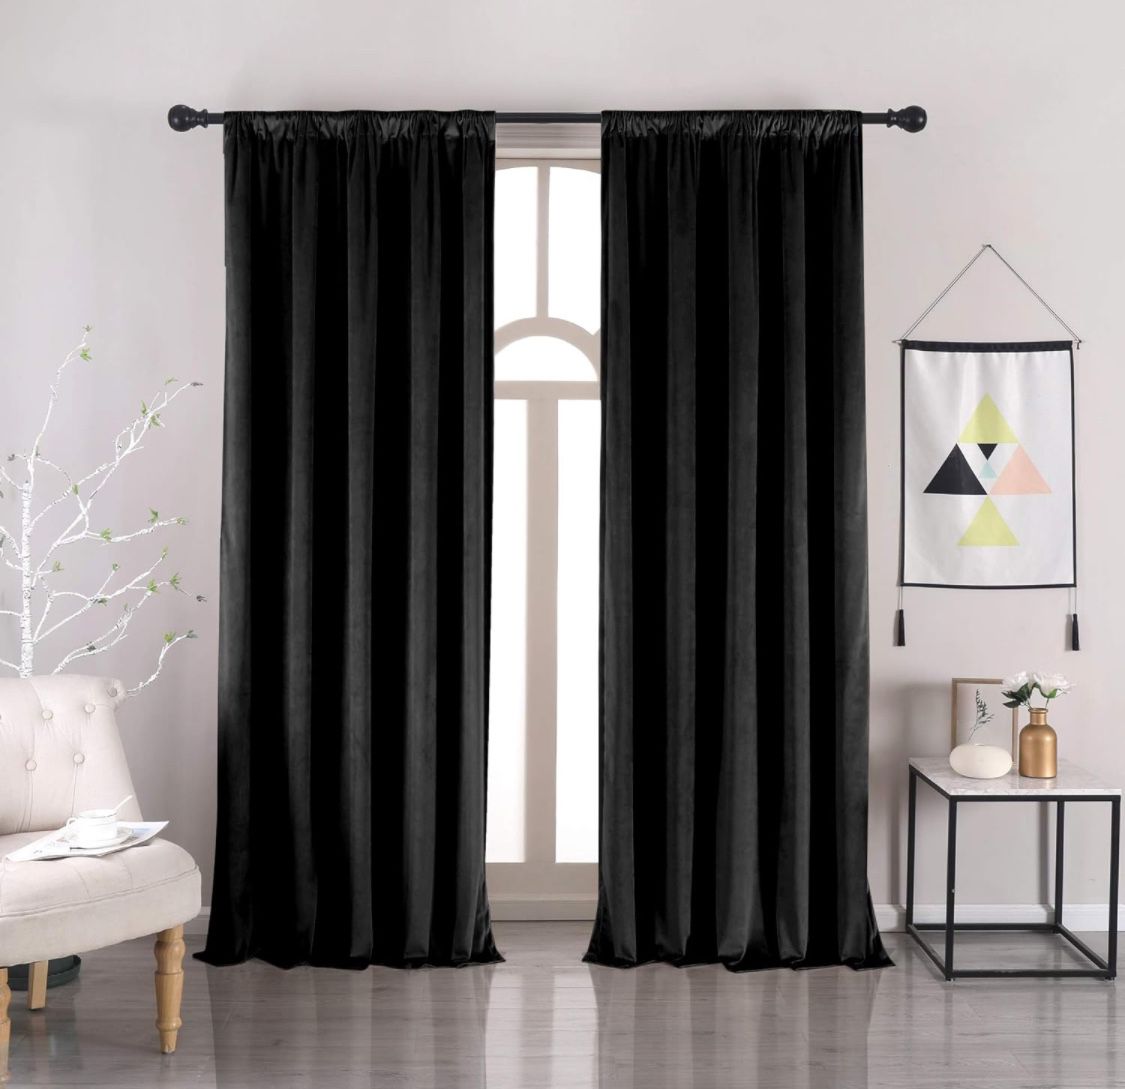 New! Blackish Velvet Blackout Curtains 52”x108”, Rod Pocket Window Curtain Panels Heat Insulated Curtains Blackout Thermal Curtains